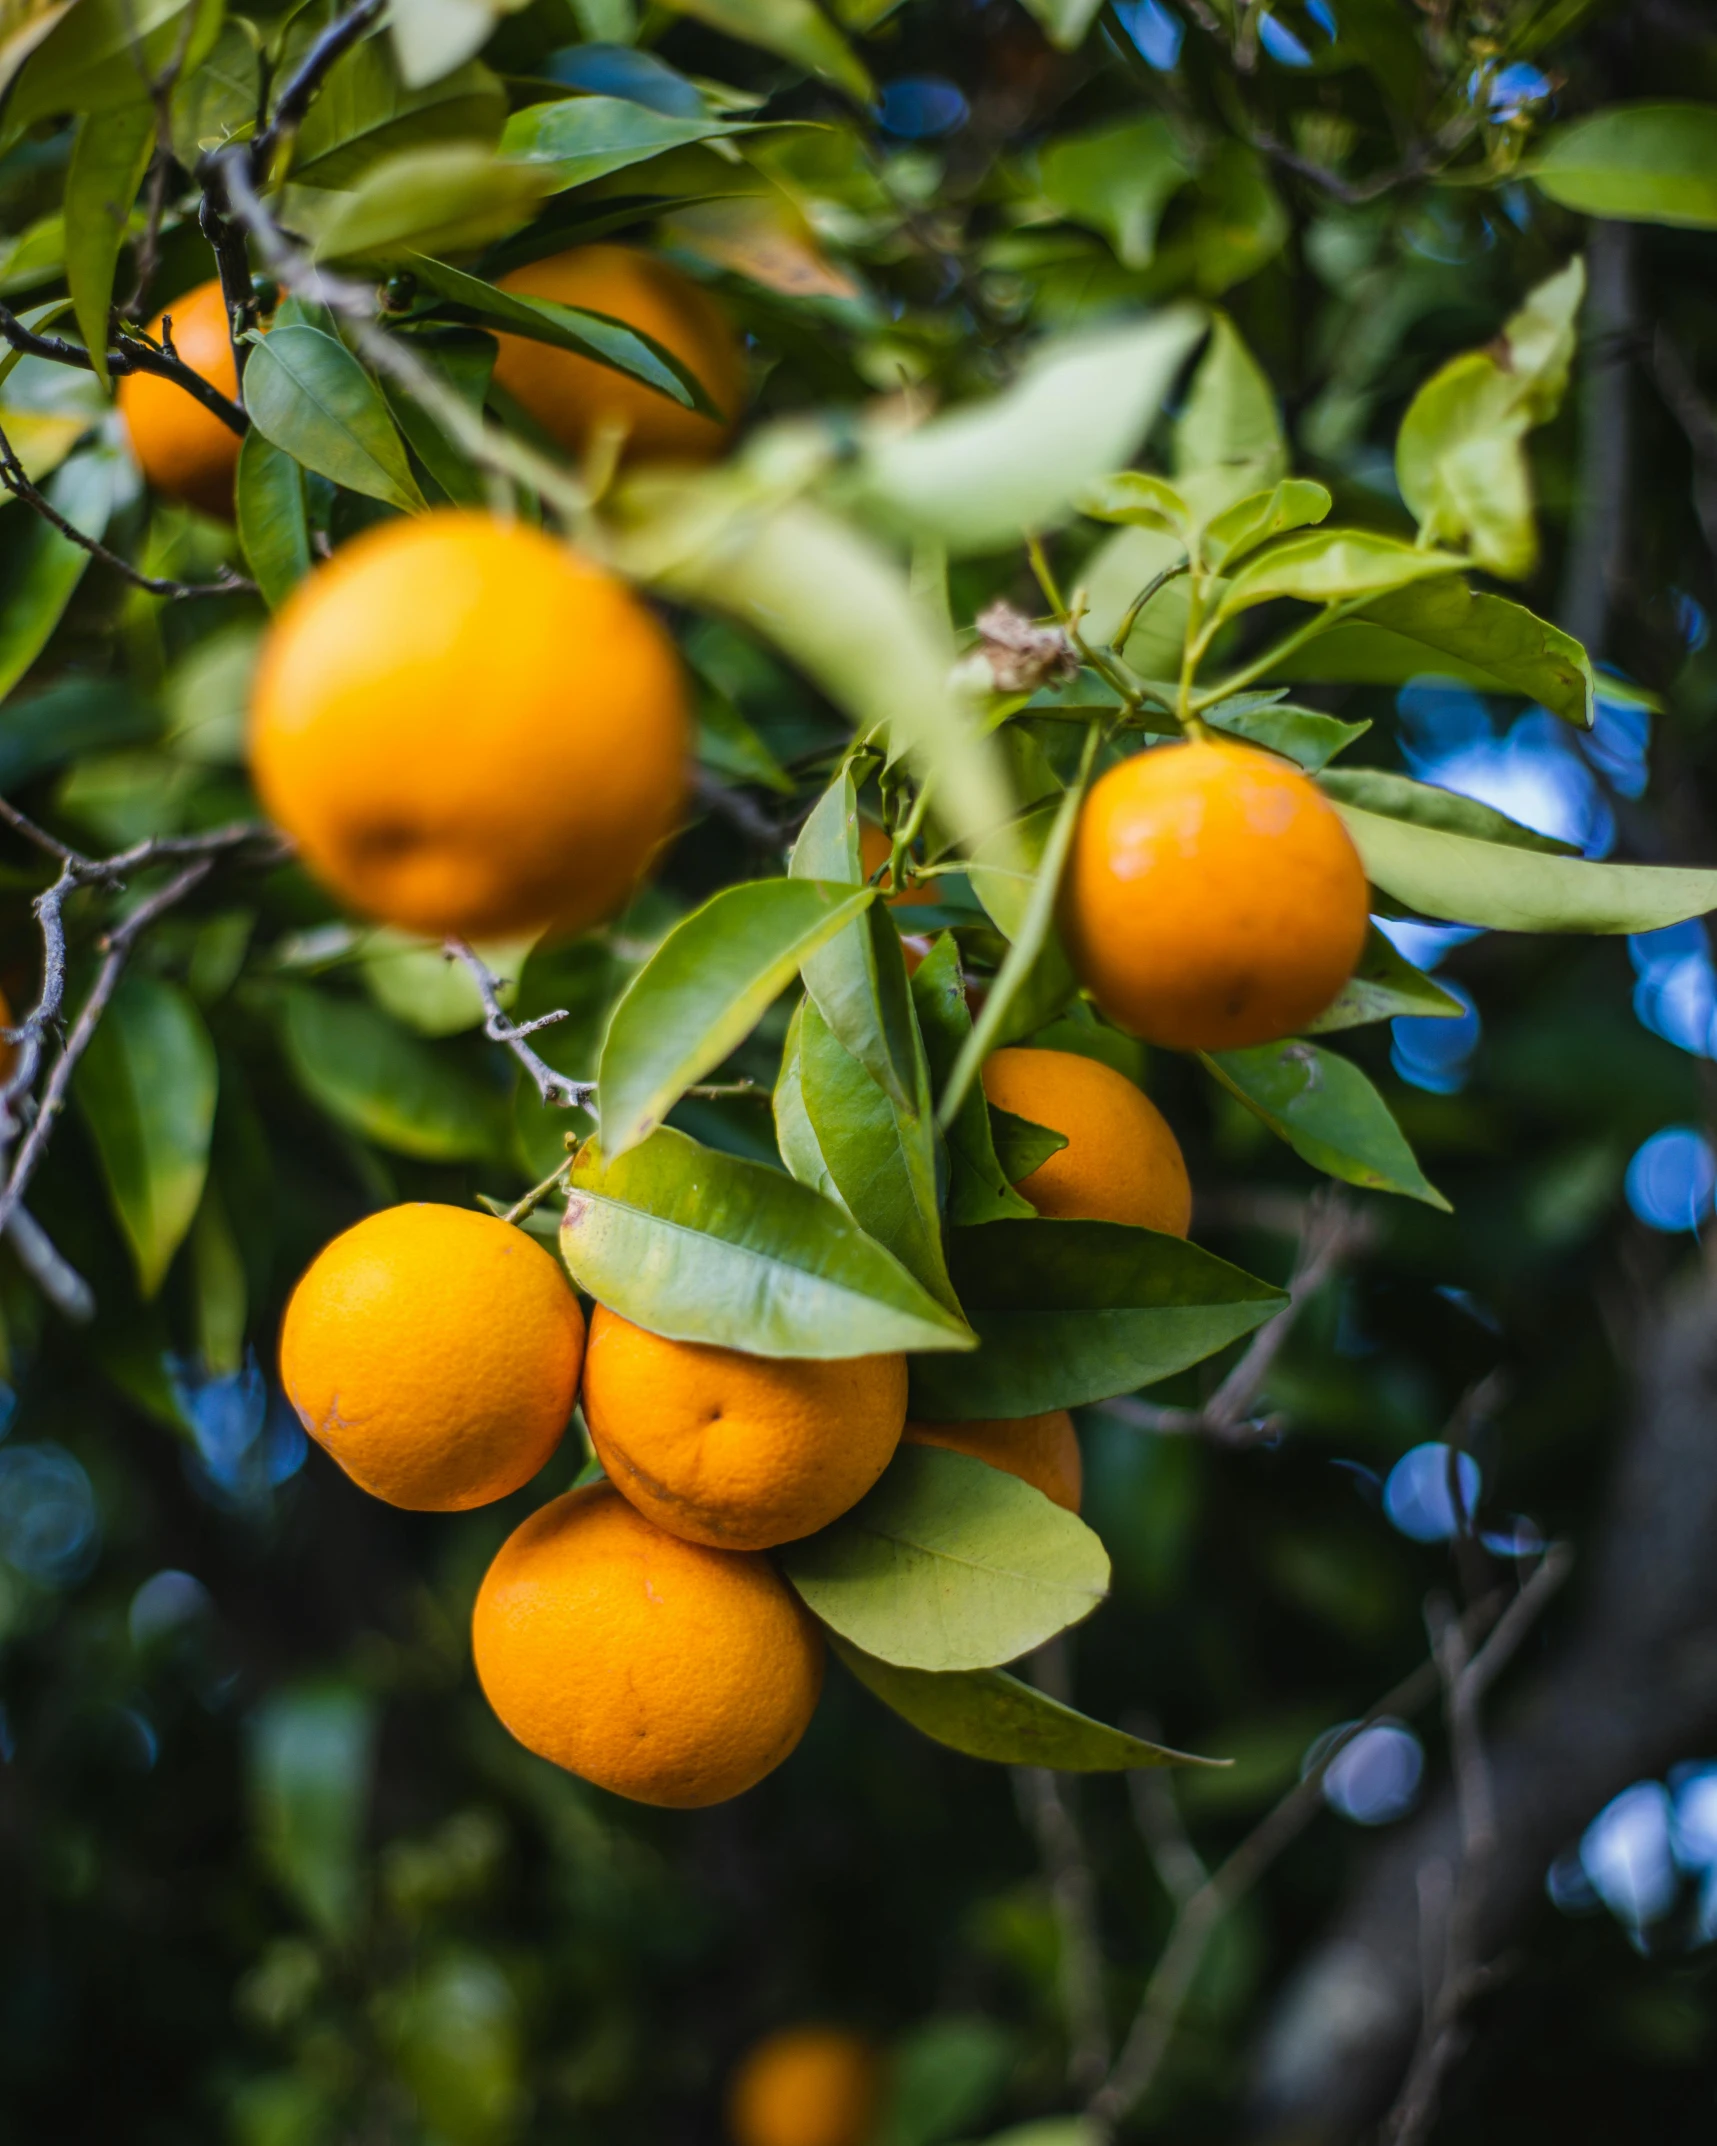 oranges hanging from trees in an orchard with bright leaves